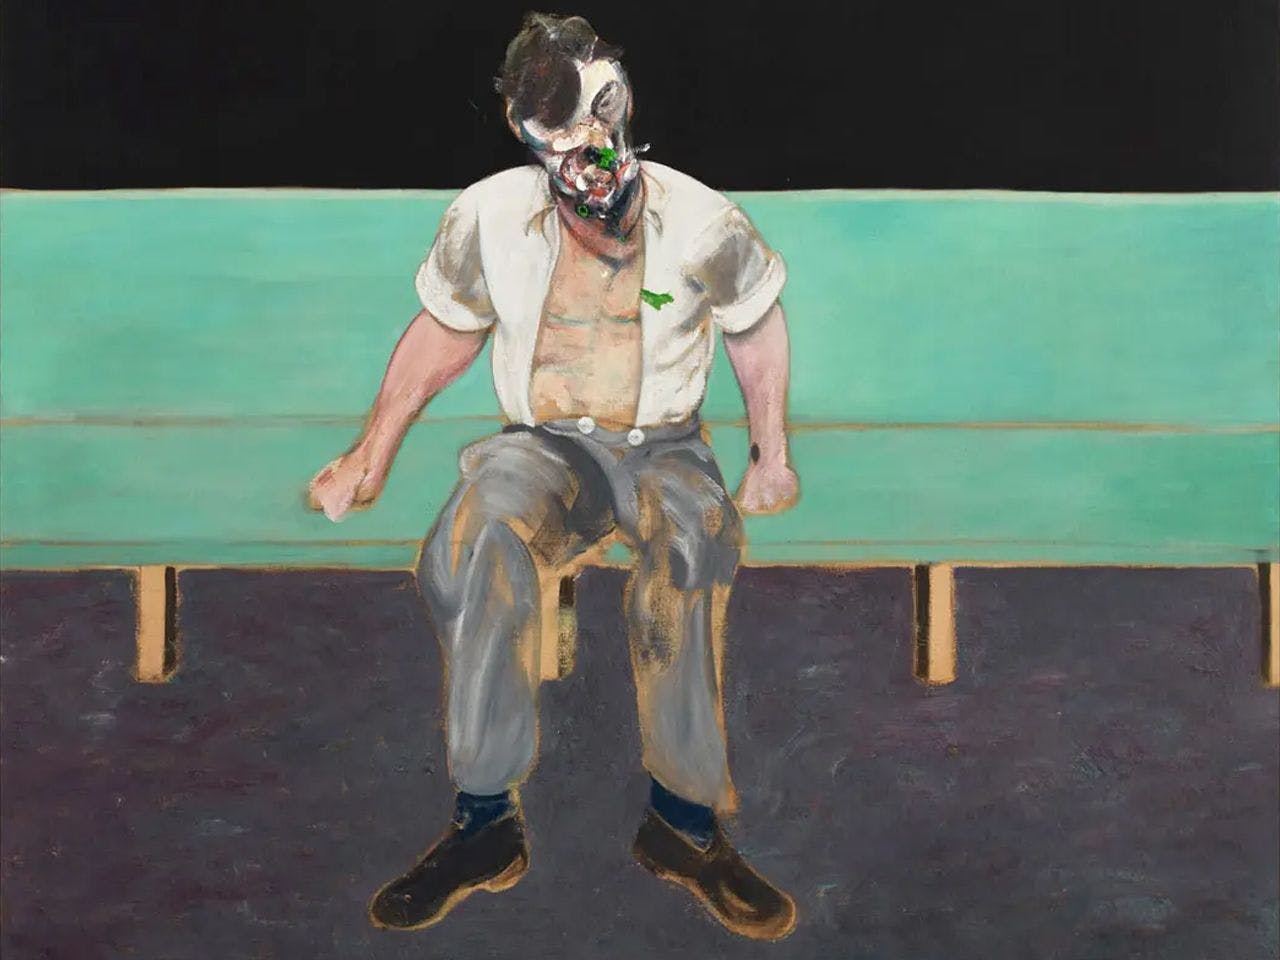 An artwork by Francis Bacon, titled Study for Portrait of Lucian Freud, dated 1964